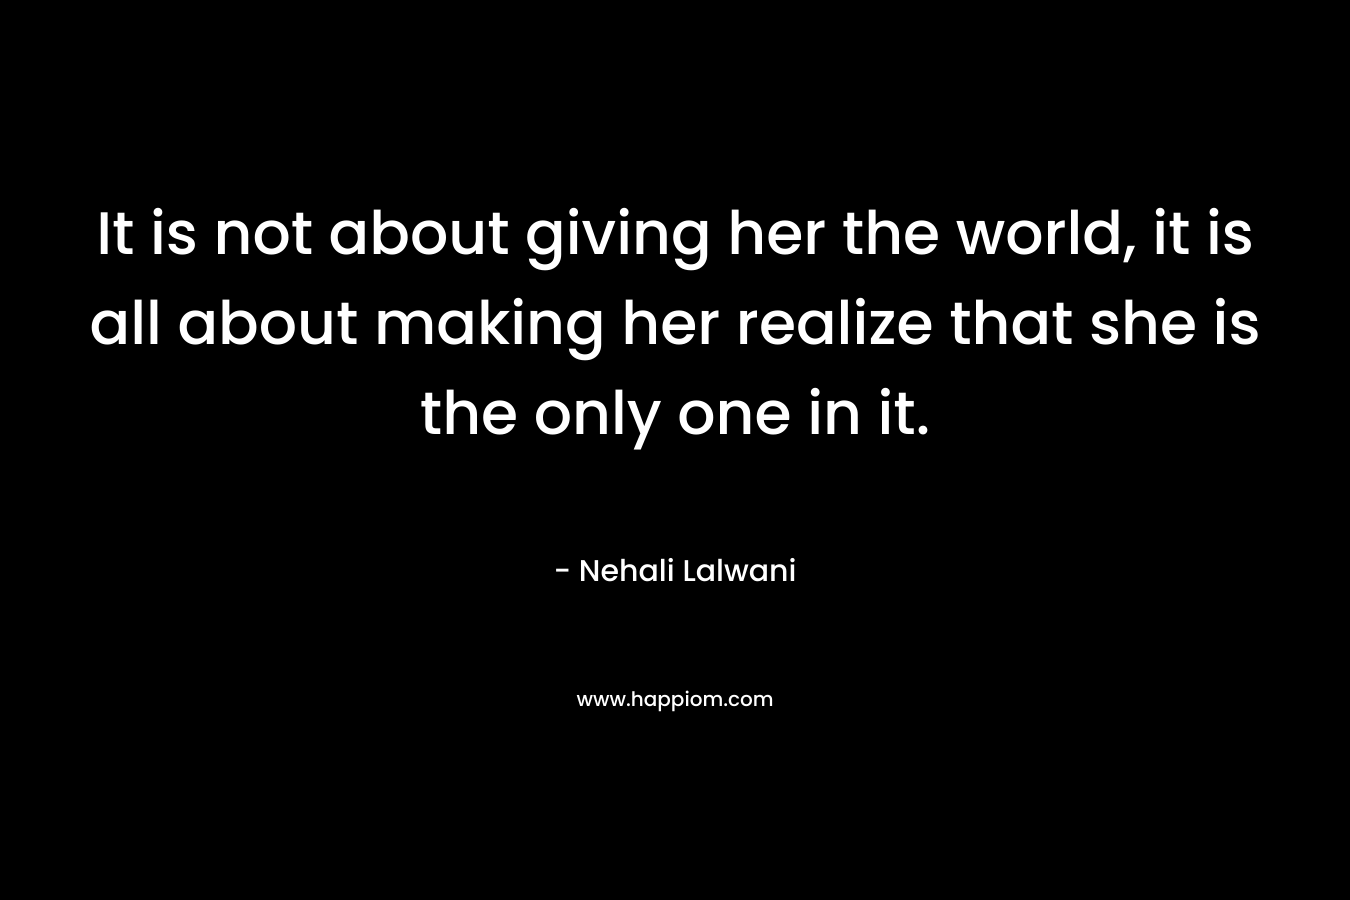 It is not about giving her the world, it is all about making her realize that she is the only one in it.